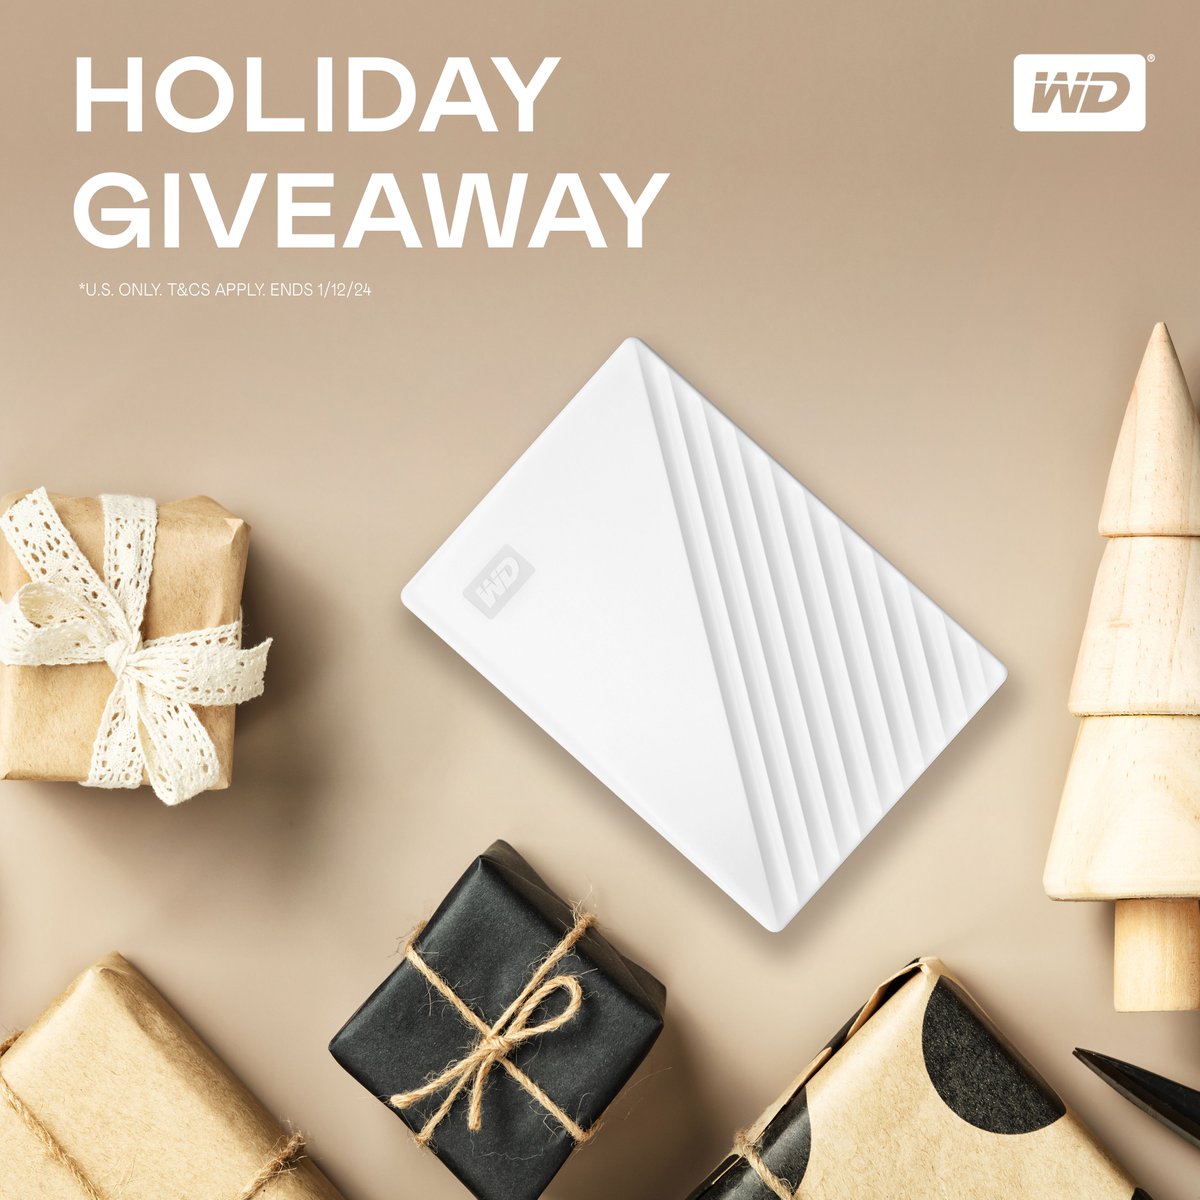 Holiday giveaway time 🥳❄️ We have a 2TB MyPassport HDD we'll be giving away this holiday season! Enter here: bit.ly/4aiptwR